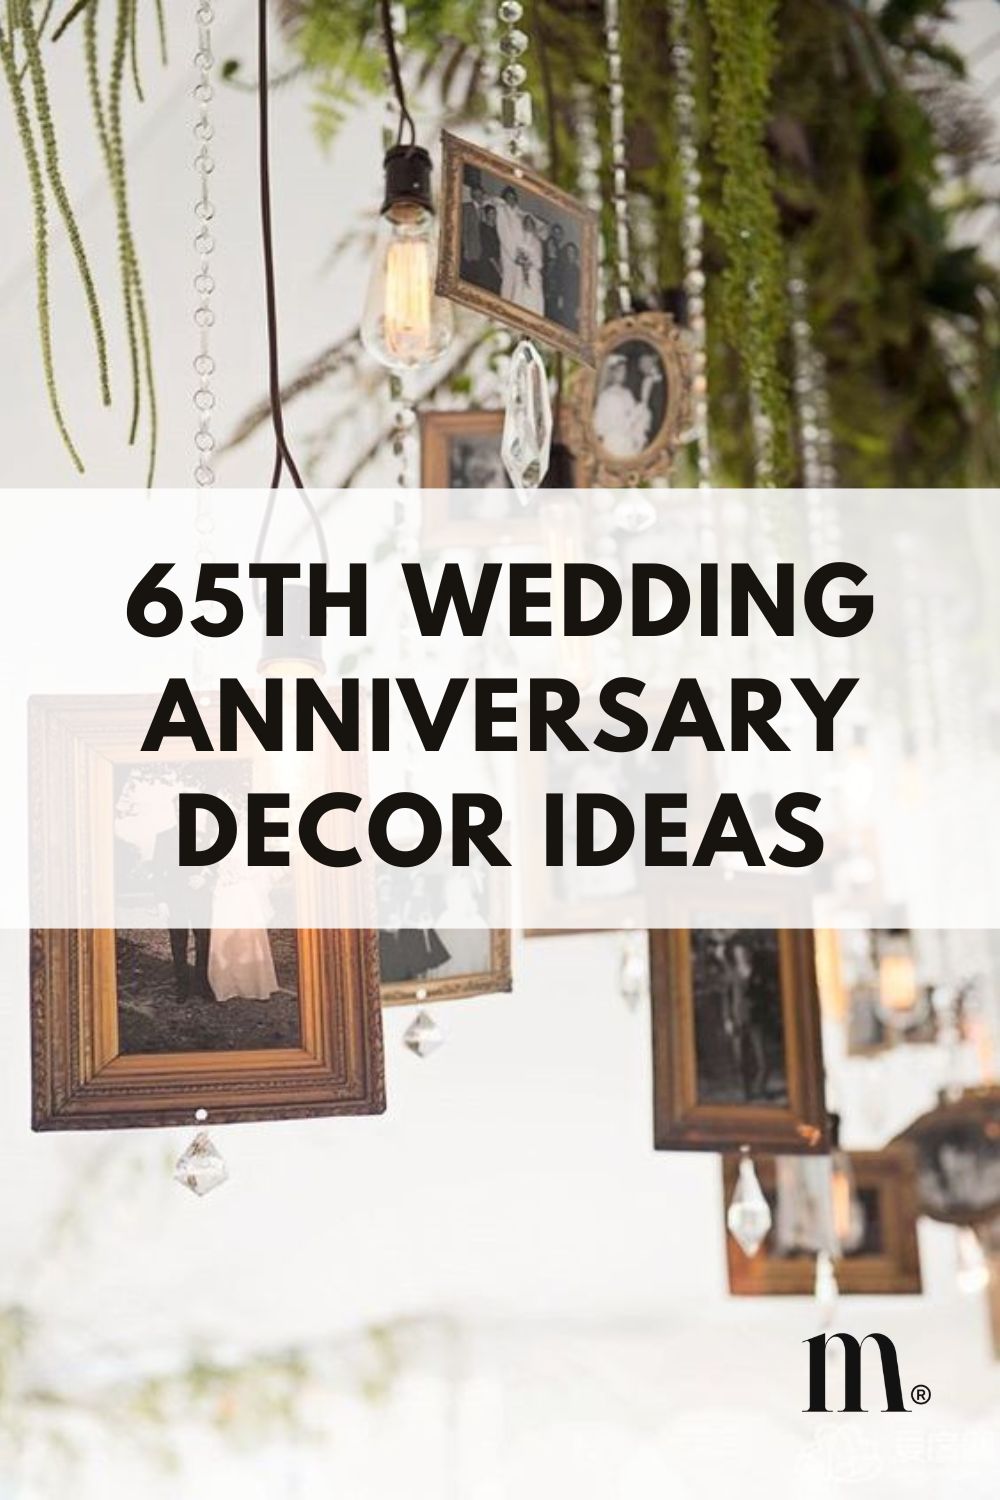 Pinterest image for an article about 65th Wedding Anniversary Decor Ideas